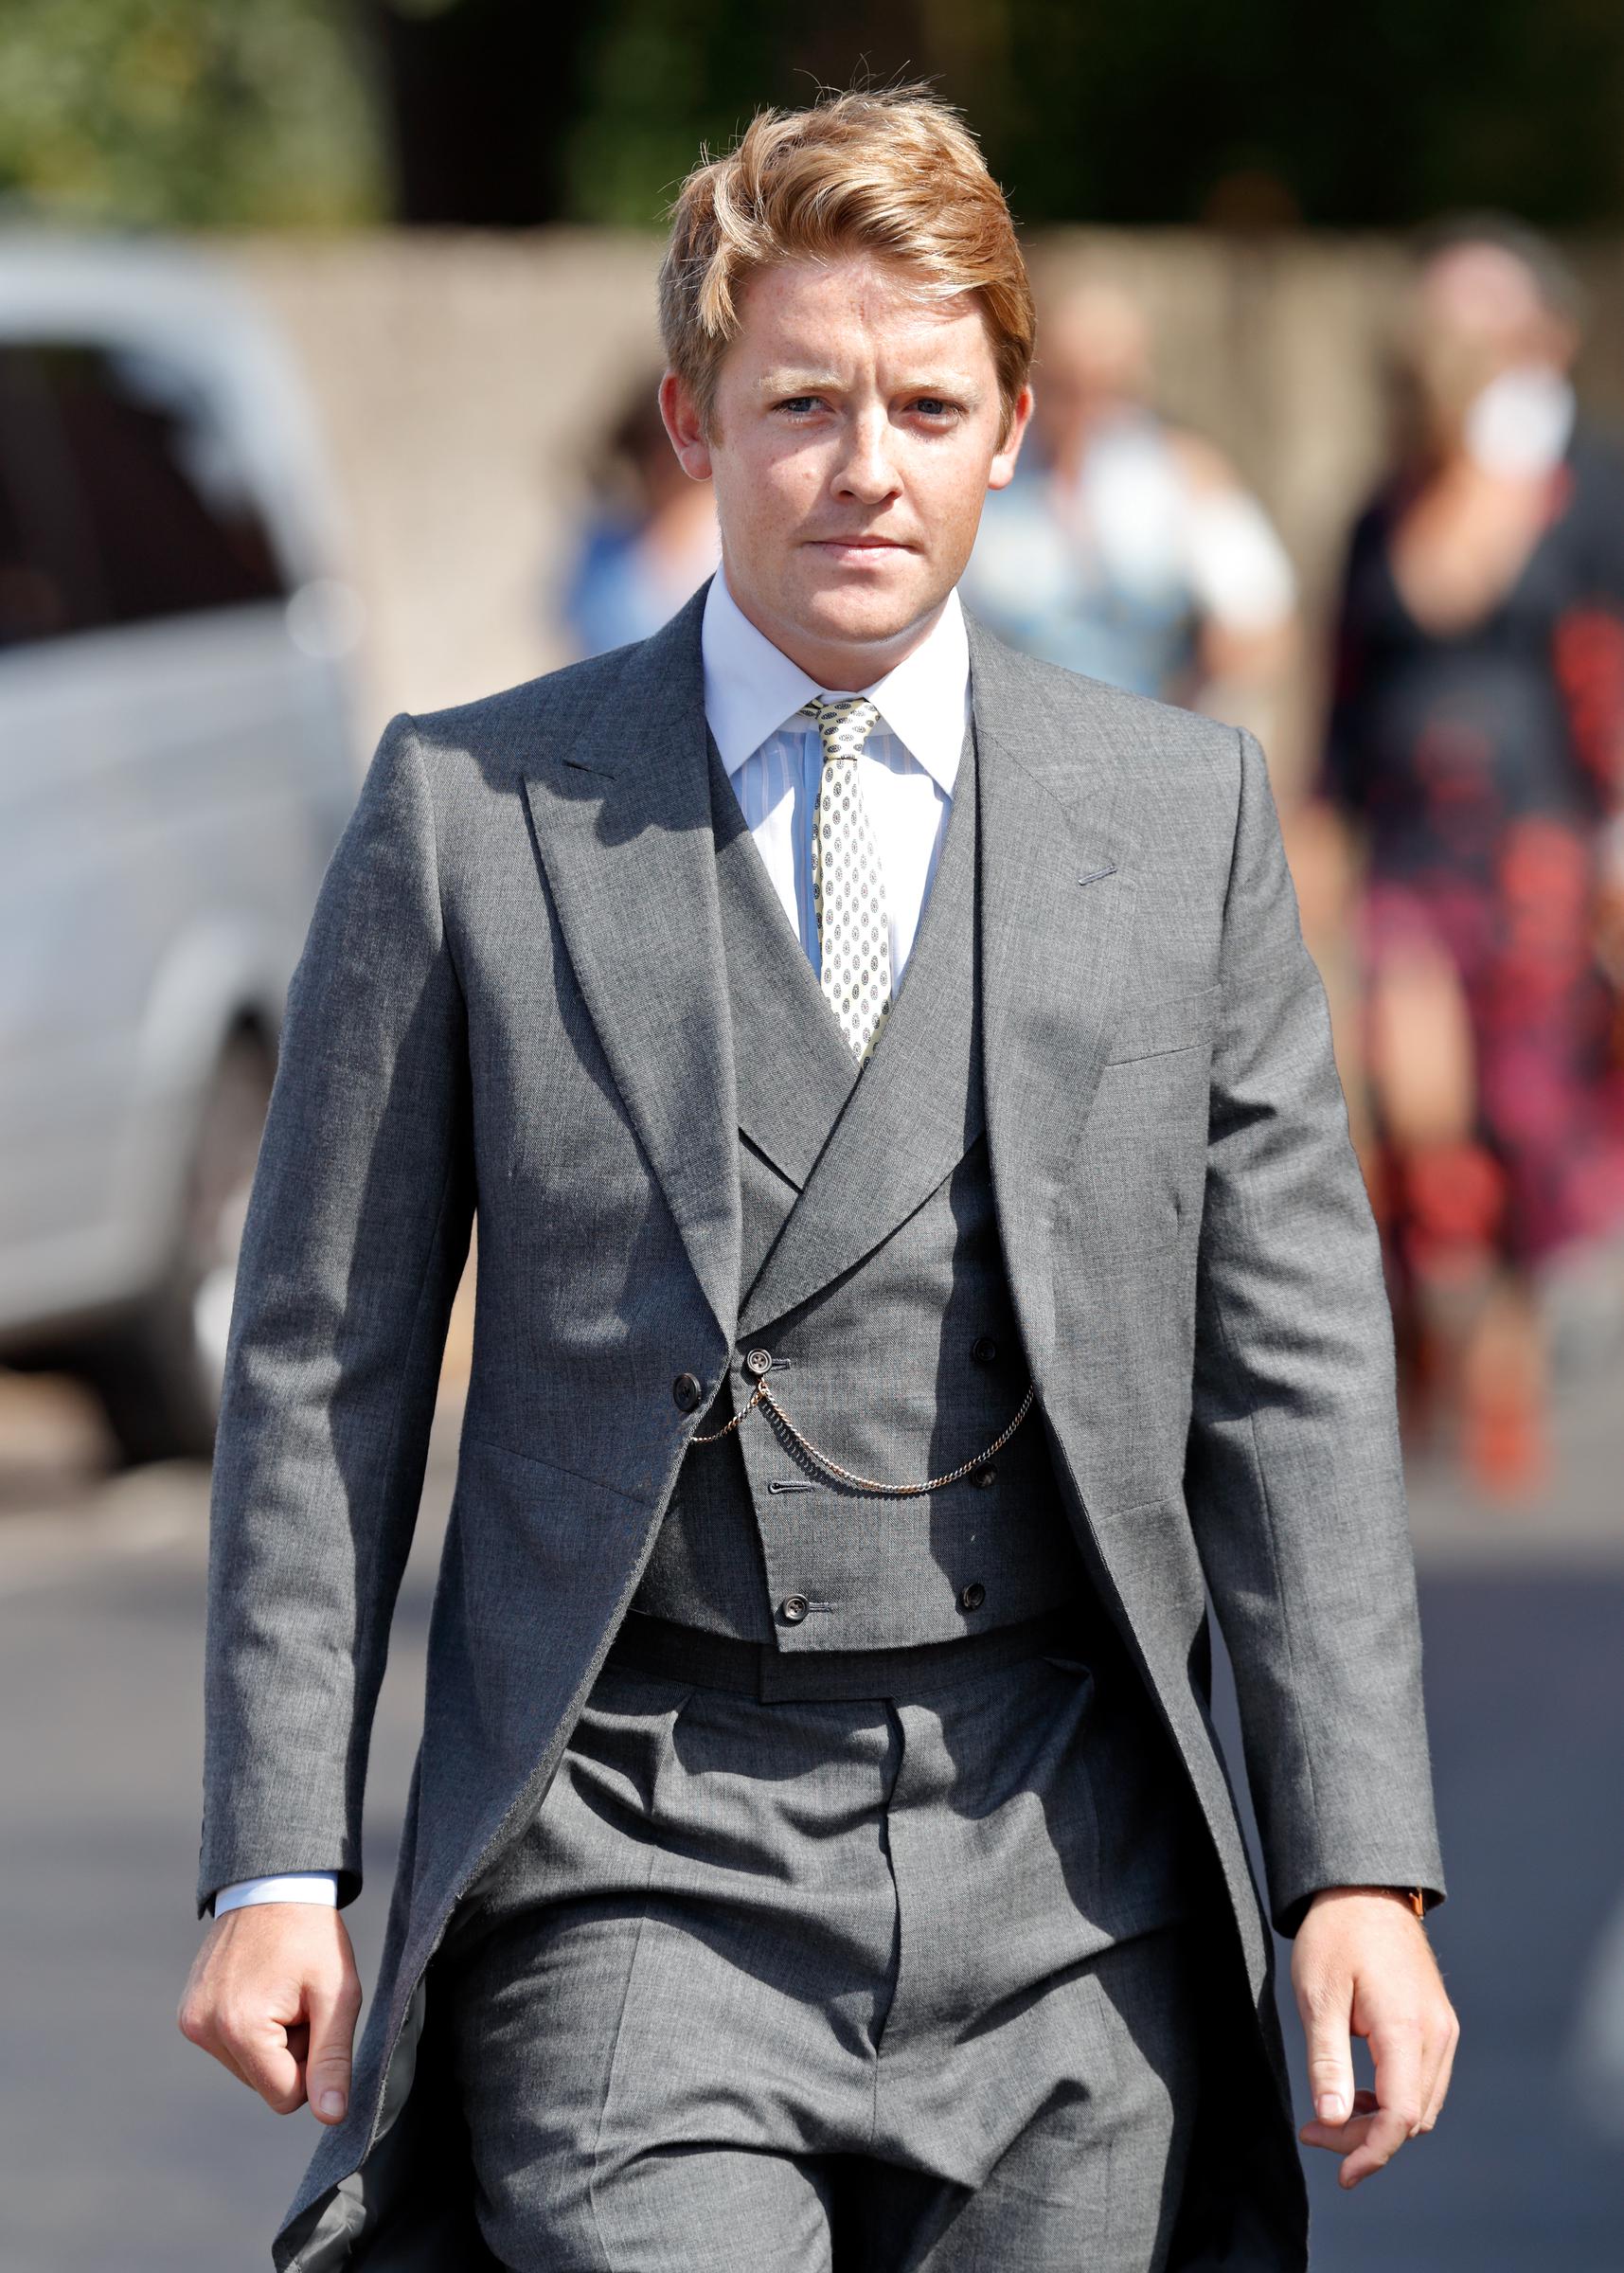 The Duke of Westminster, Hugh Grosvenor, at the wedding of Charlie van Straubenzee and Daisy Jenks in Frensham, England on August 4, 2018 | Source: Getty Images